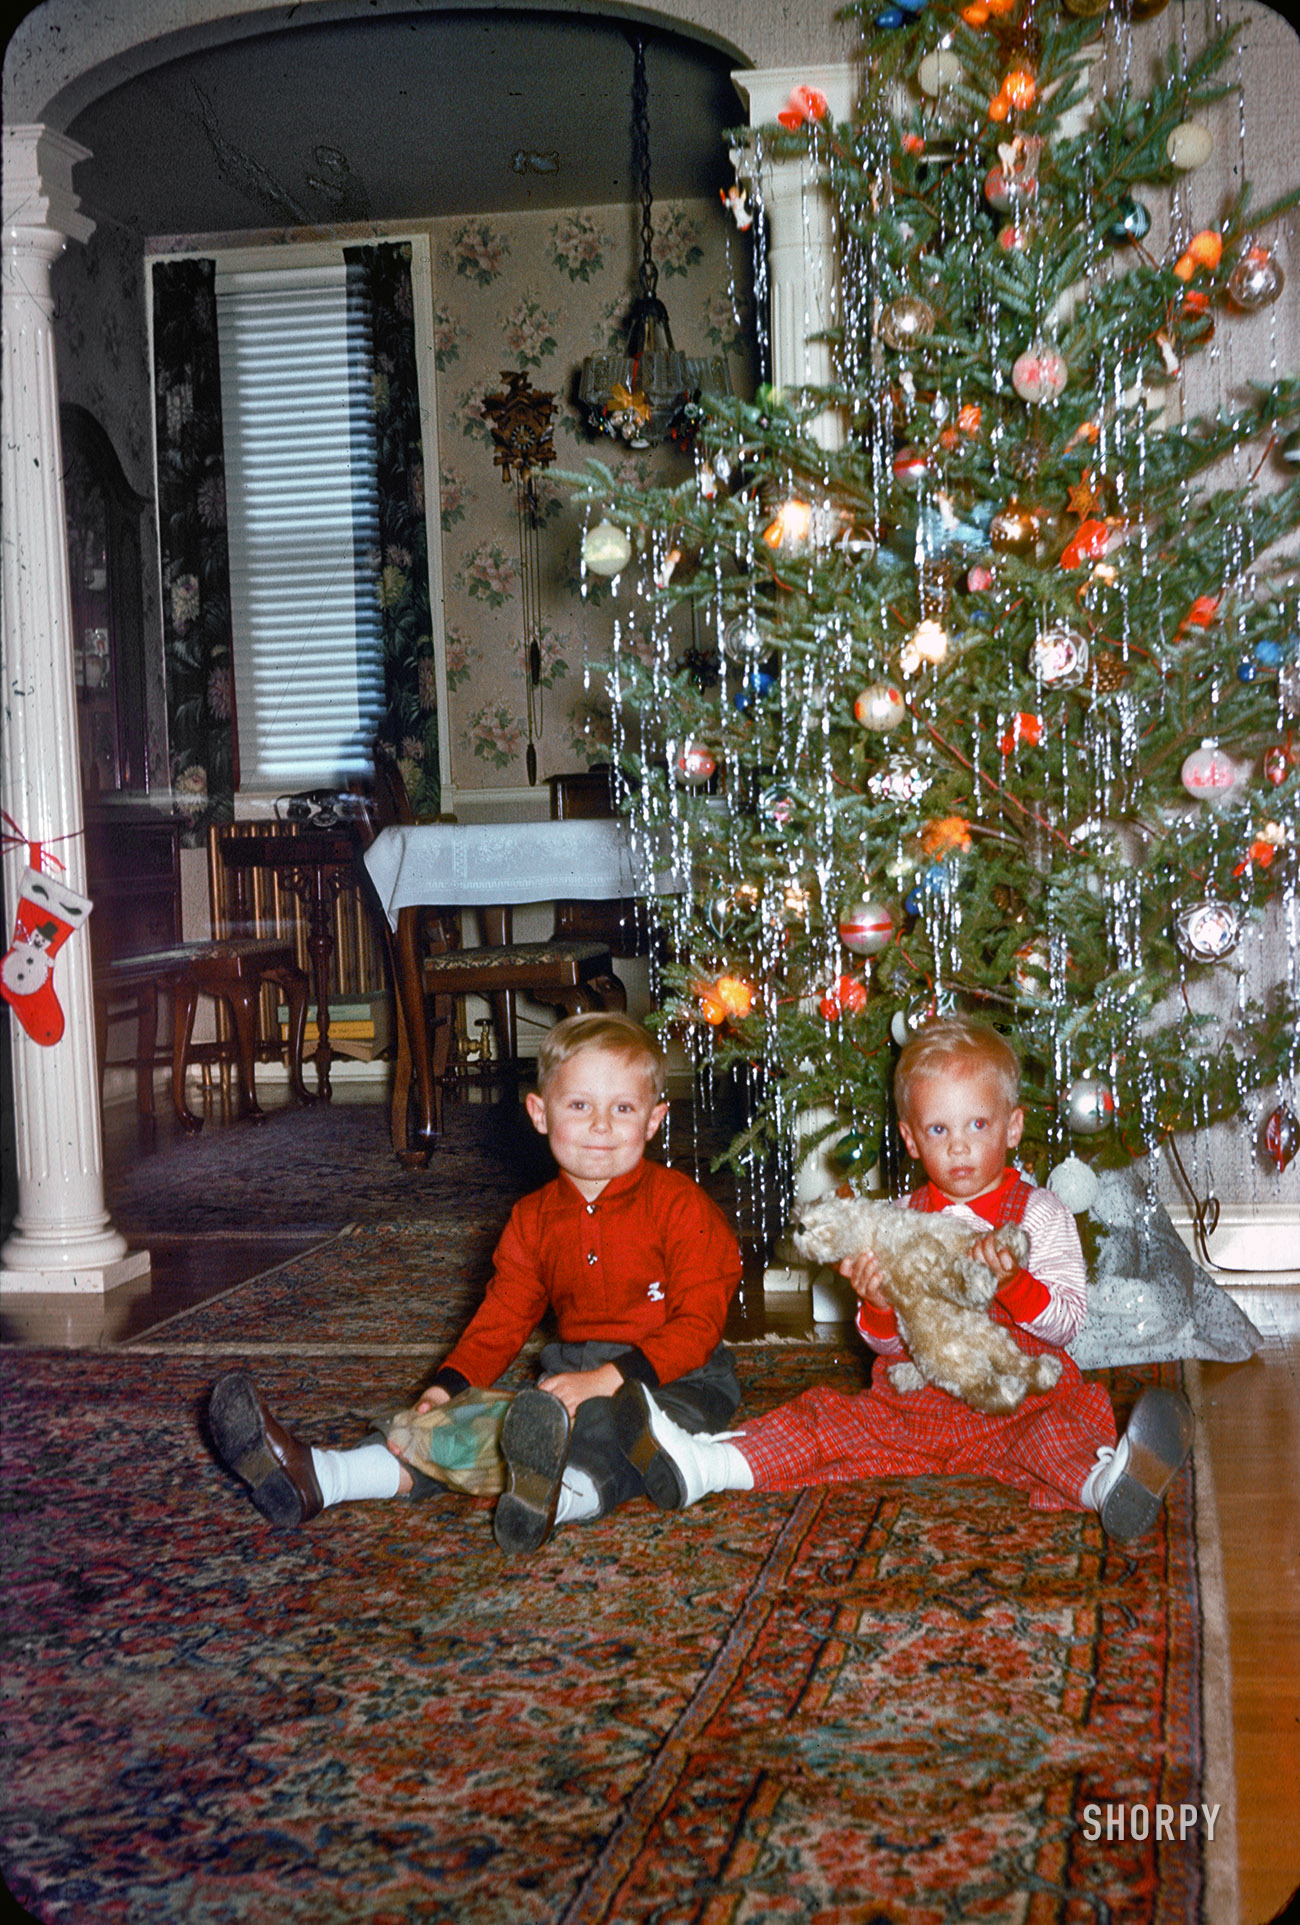  Circa 1958, it's the Pennsy Brothers, and they're ready for Christmas. Let's see some presents under that tree! 35mm Kodachrome slide. View full size.